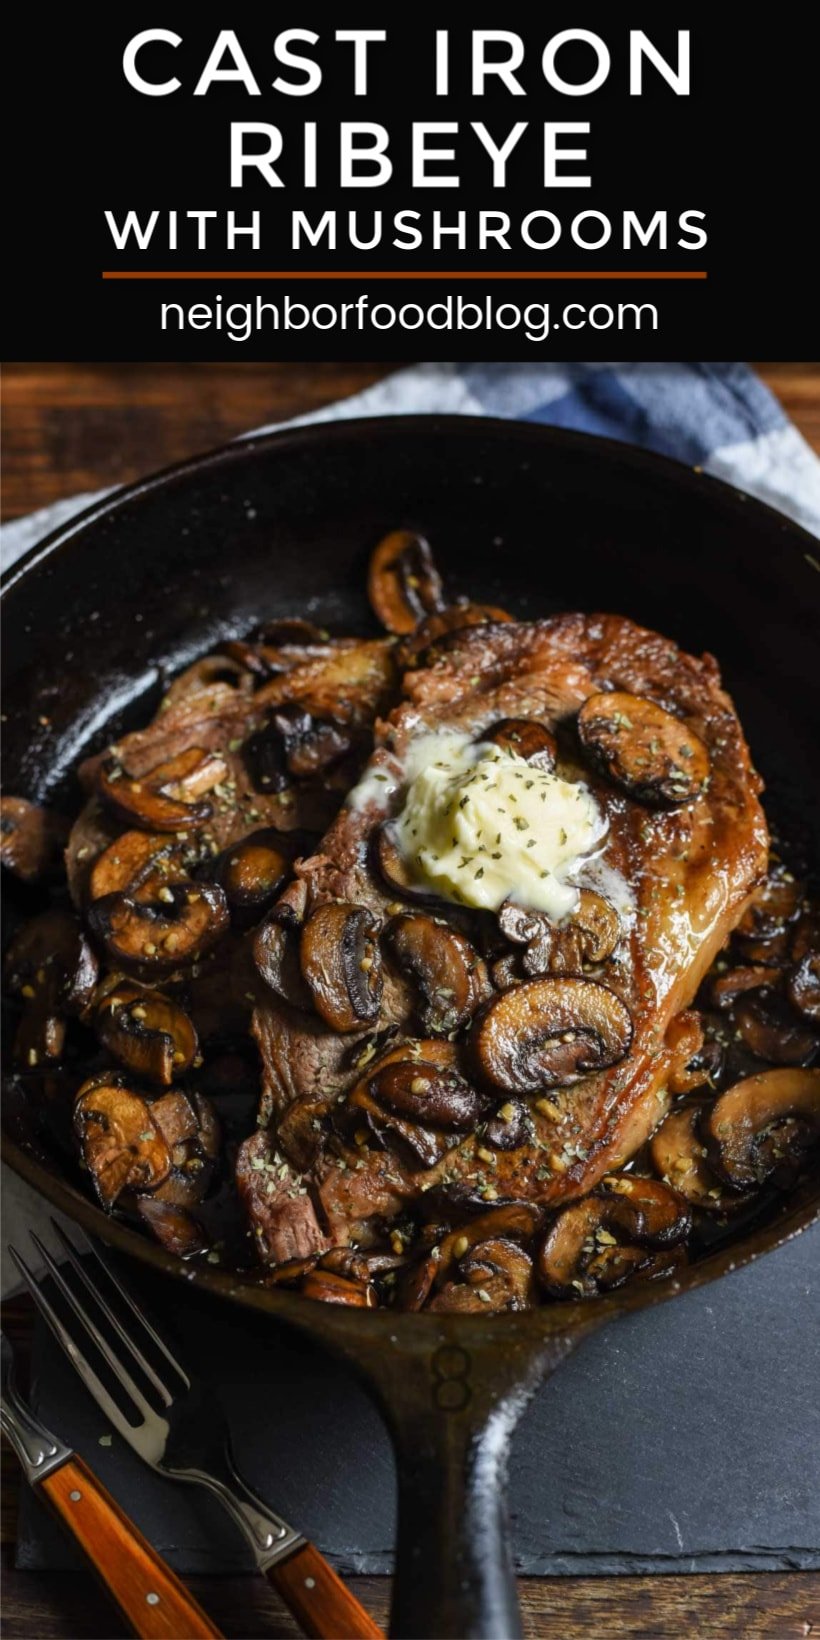 Banner showing a cast iron ribeye steak served in a skillet with mushrooms and butter